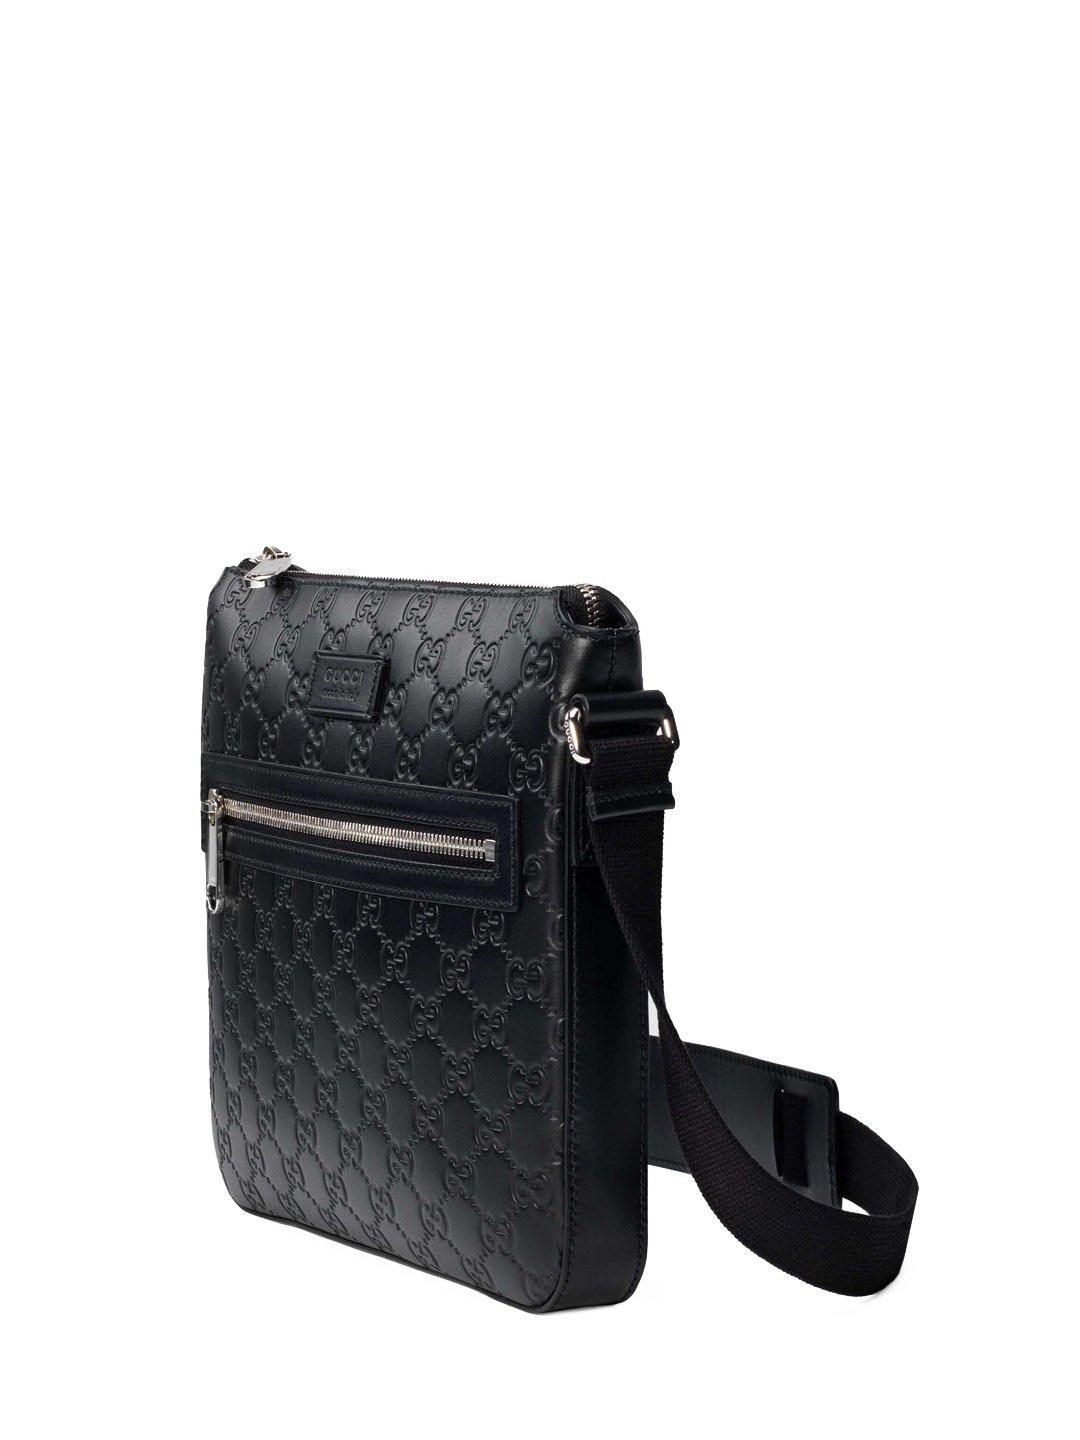 Black Gucci Messenger on Sale, UP TO 65% OFF |  www.sinestesiagastronomica.com